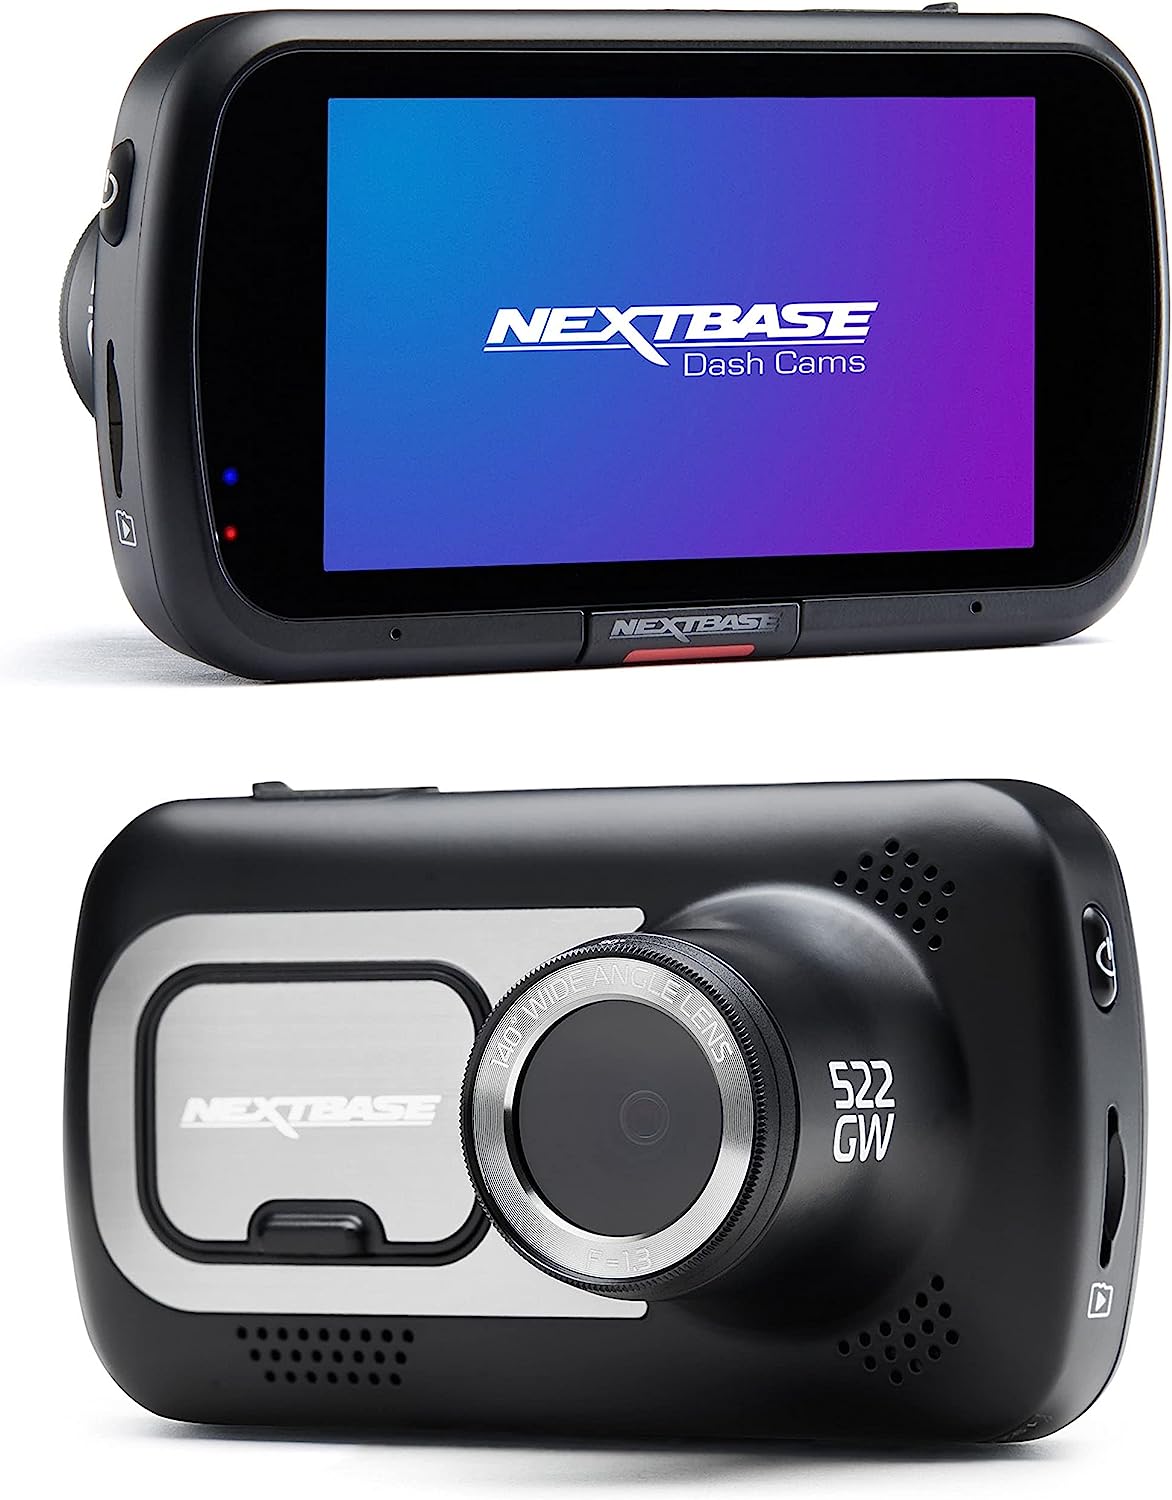 Nextbase 522GW Wi-Fi Dash Cam Front Camera with Alex Enabled - Full 1440p HD Recording